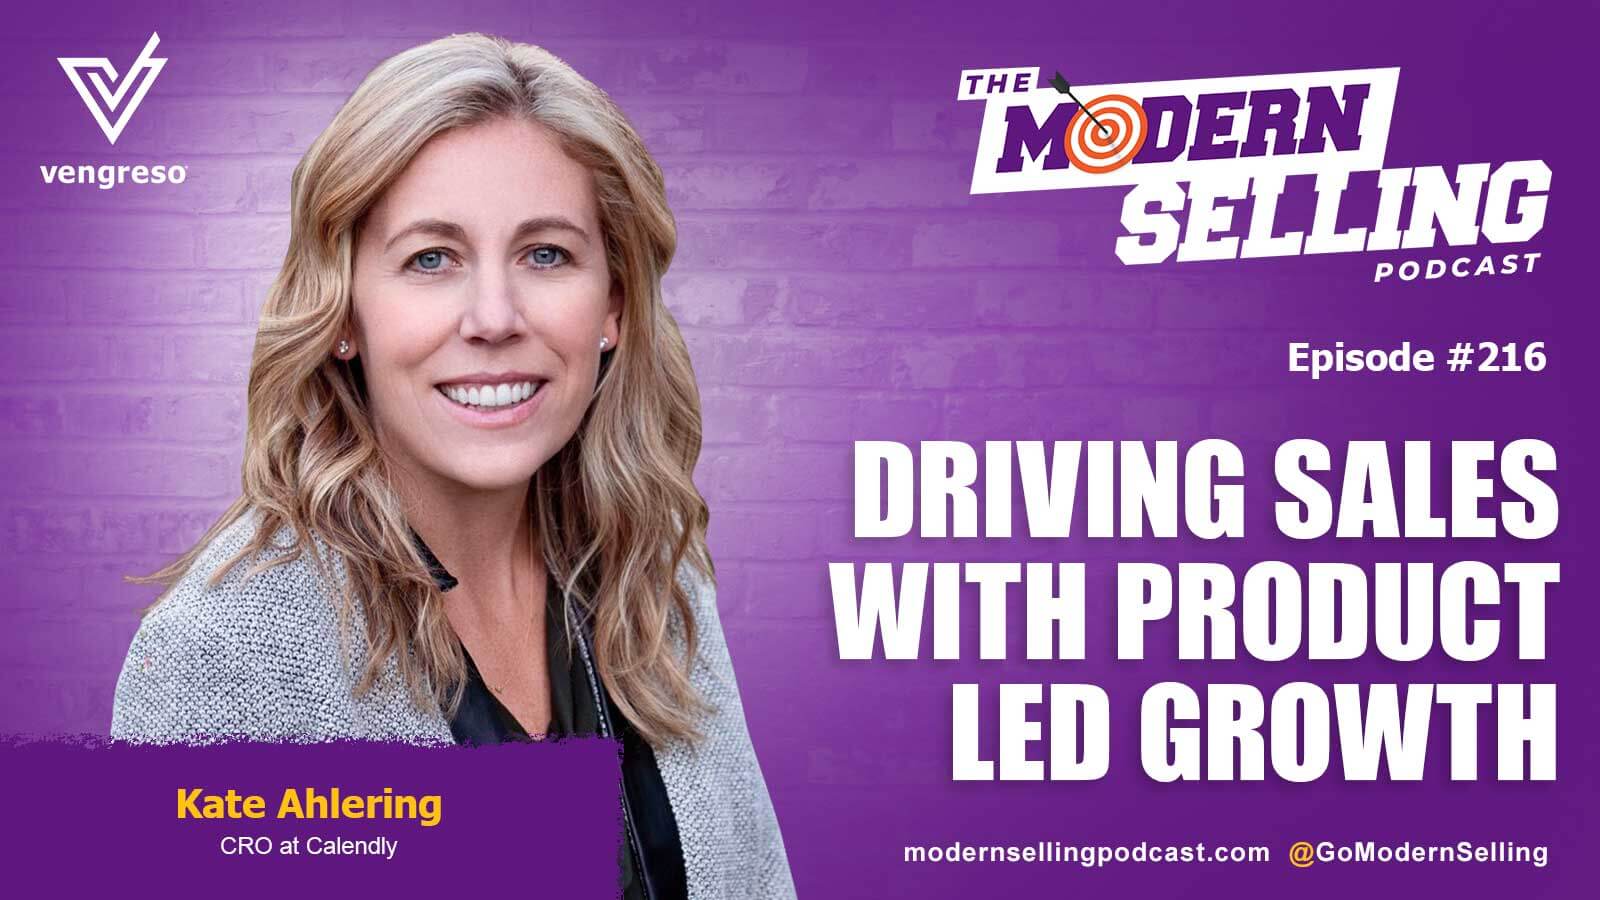 woman smiling kate ahleringdriving sales with product led growth 216 modern selling podcast